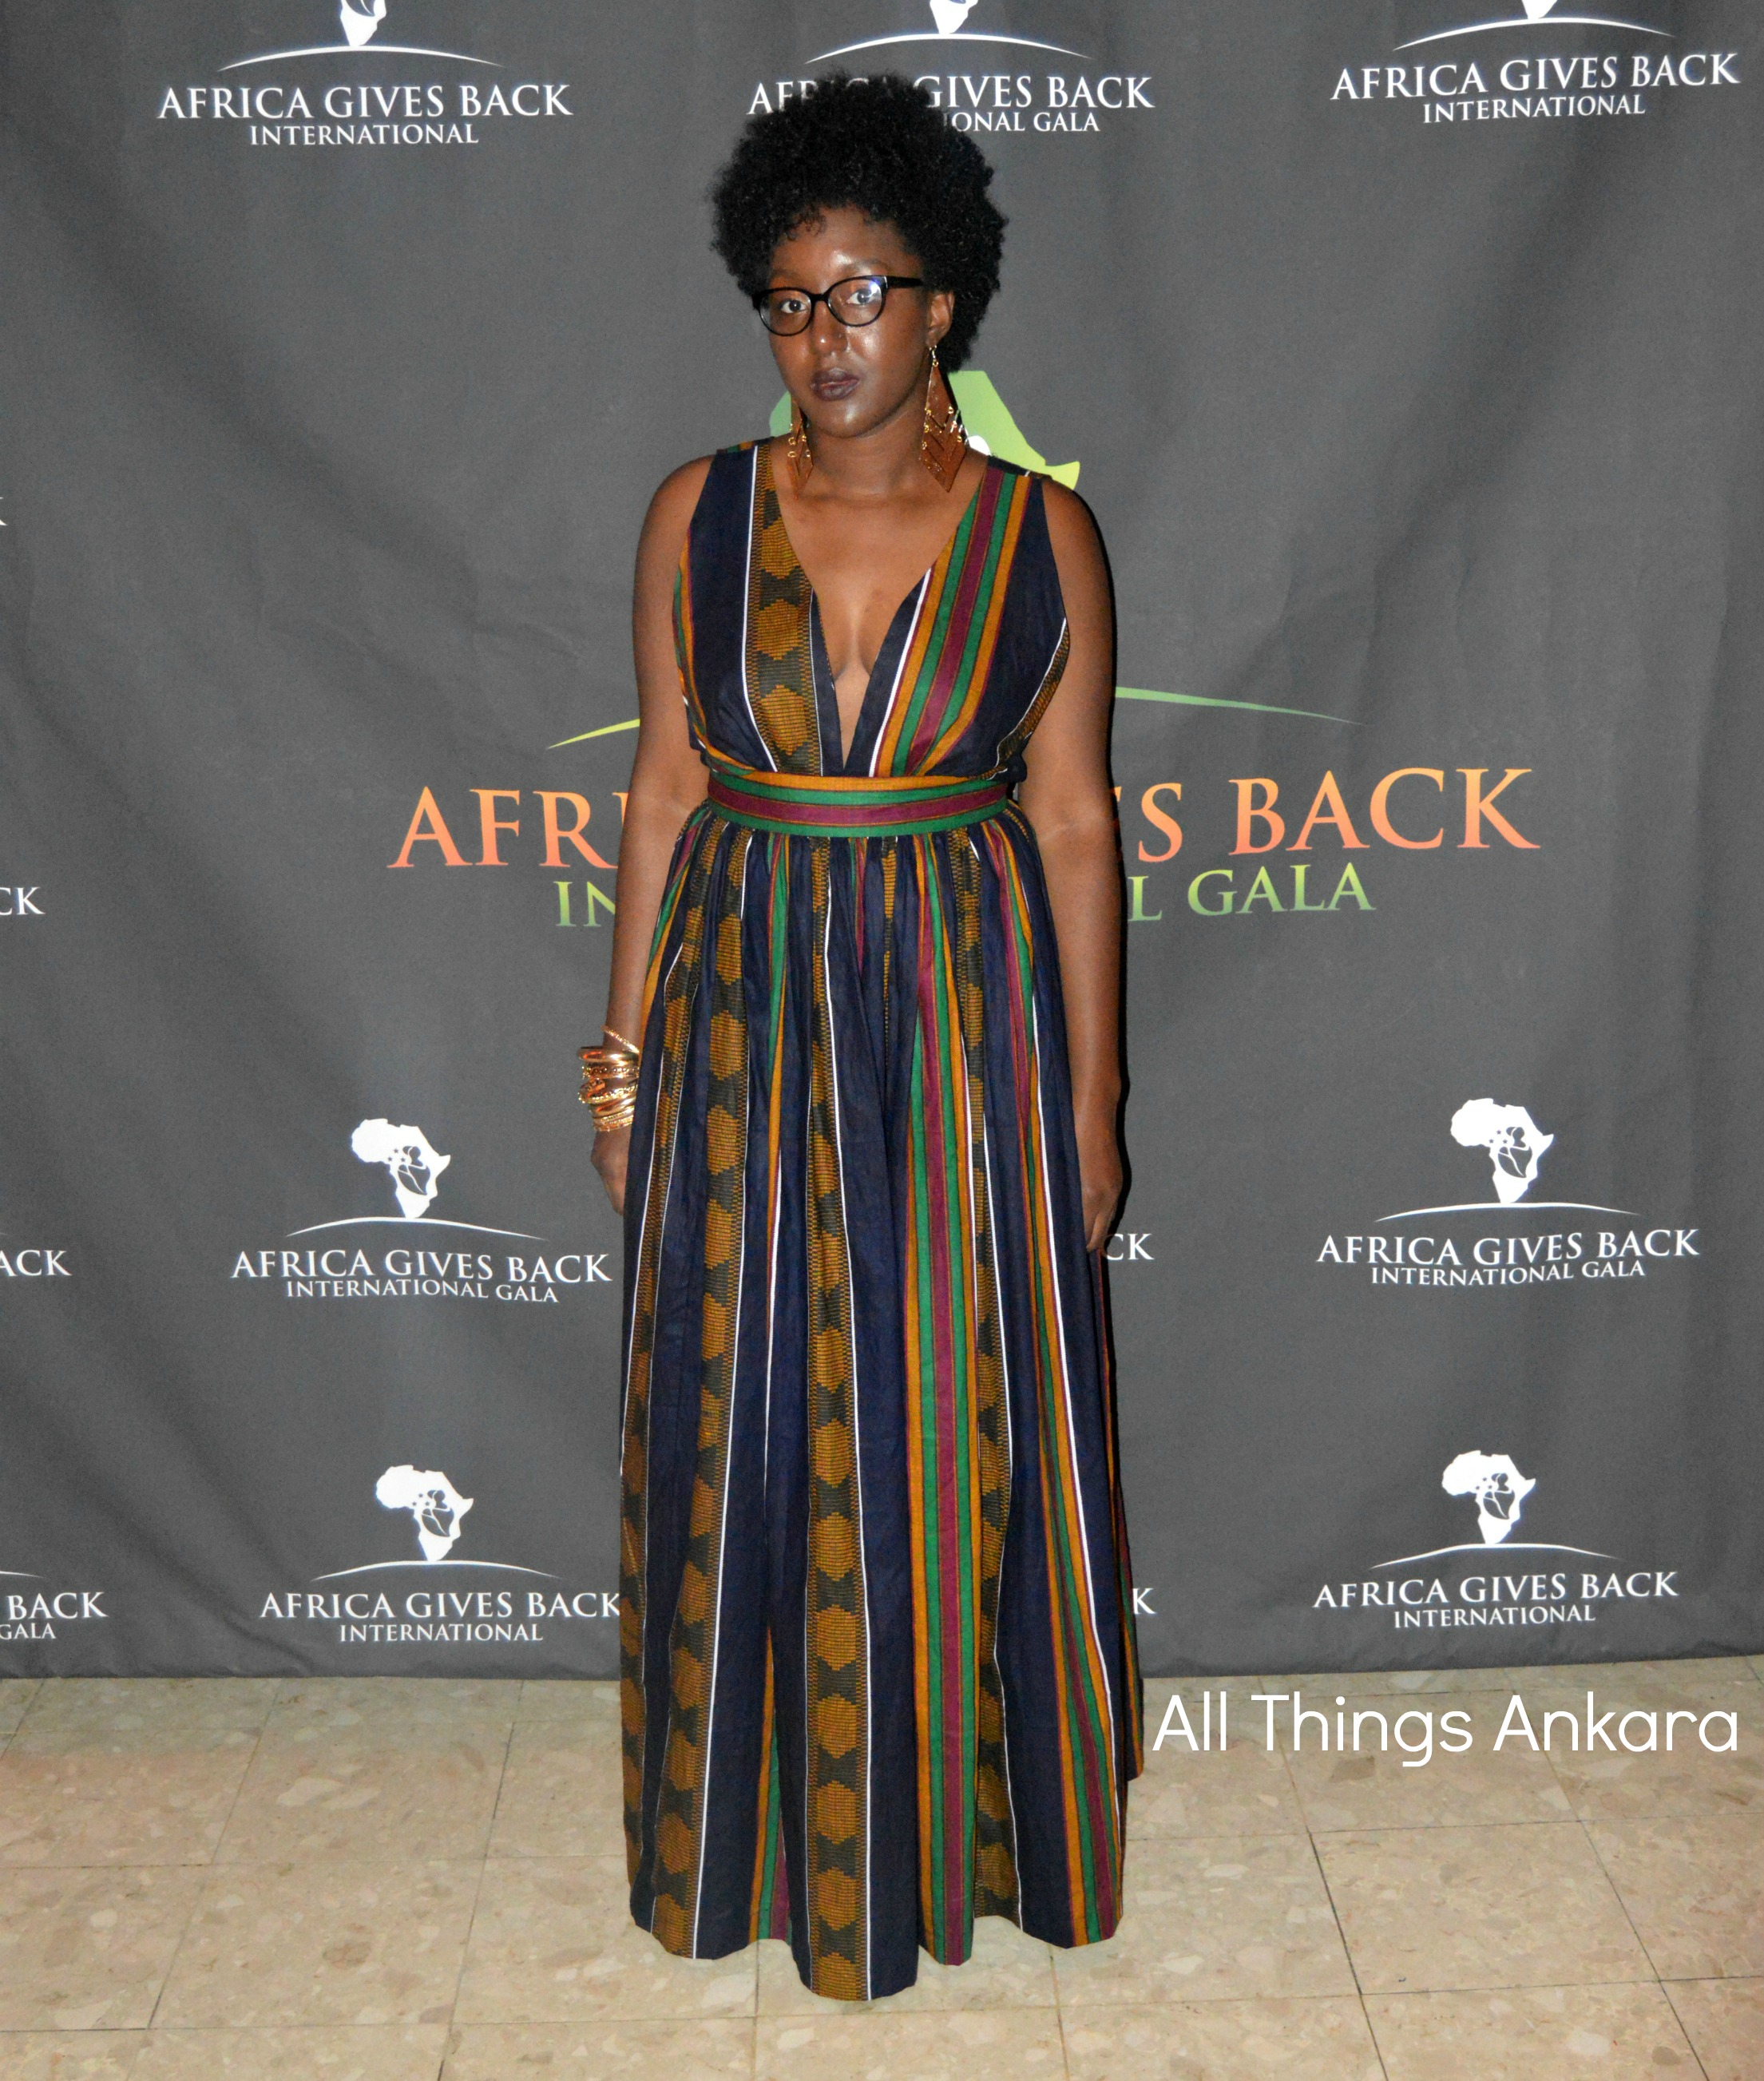 Gala-All Things Ankara's Best Dressed Women at Africa Gives Back International Gala 2016 10